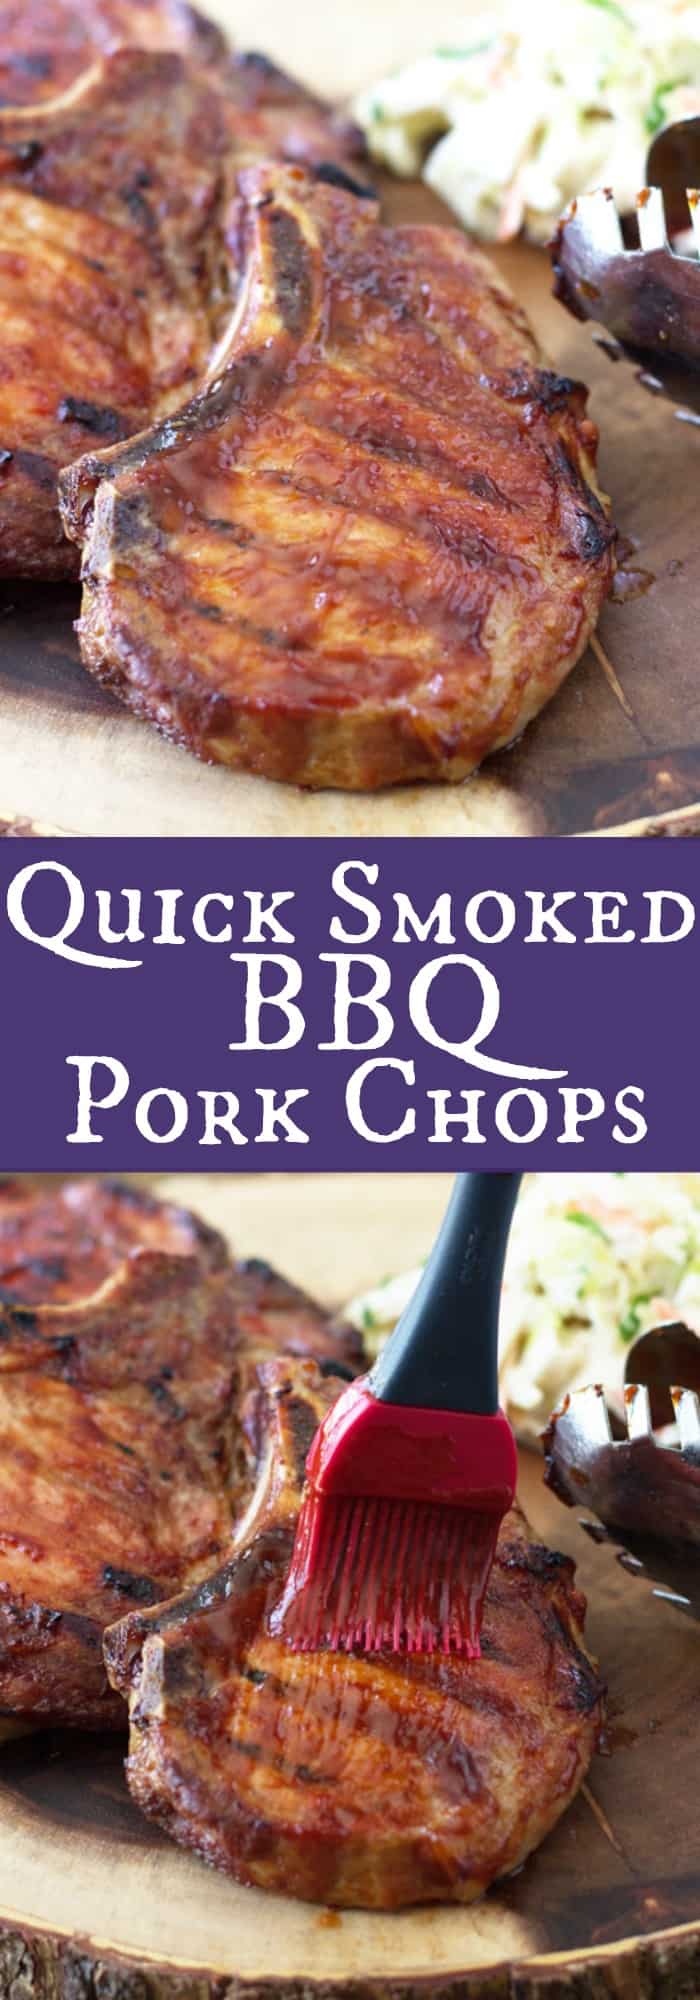 Quick Smoked BBQ Pork Chops are an easy way to get that great smoke flavor without the long smoking process. | www.countrysidecravings.com